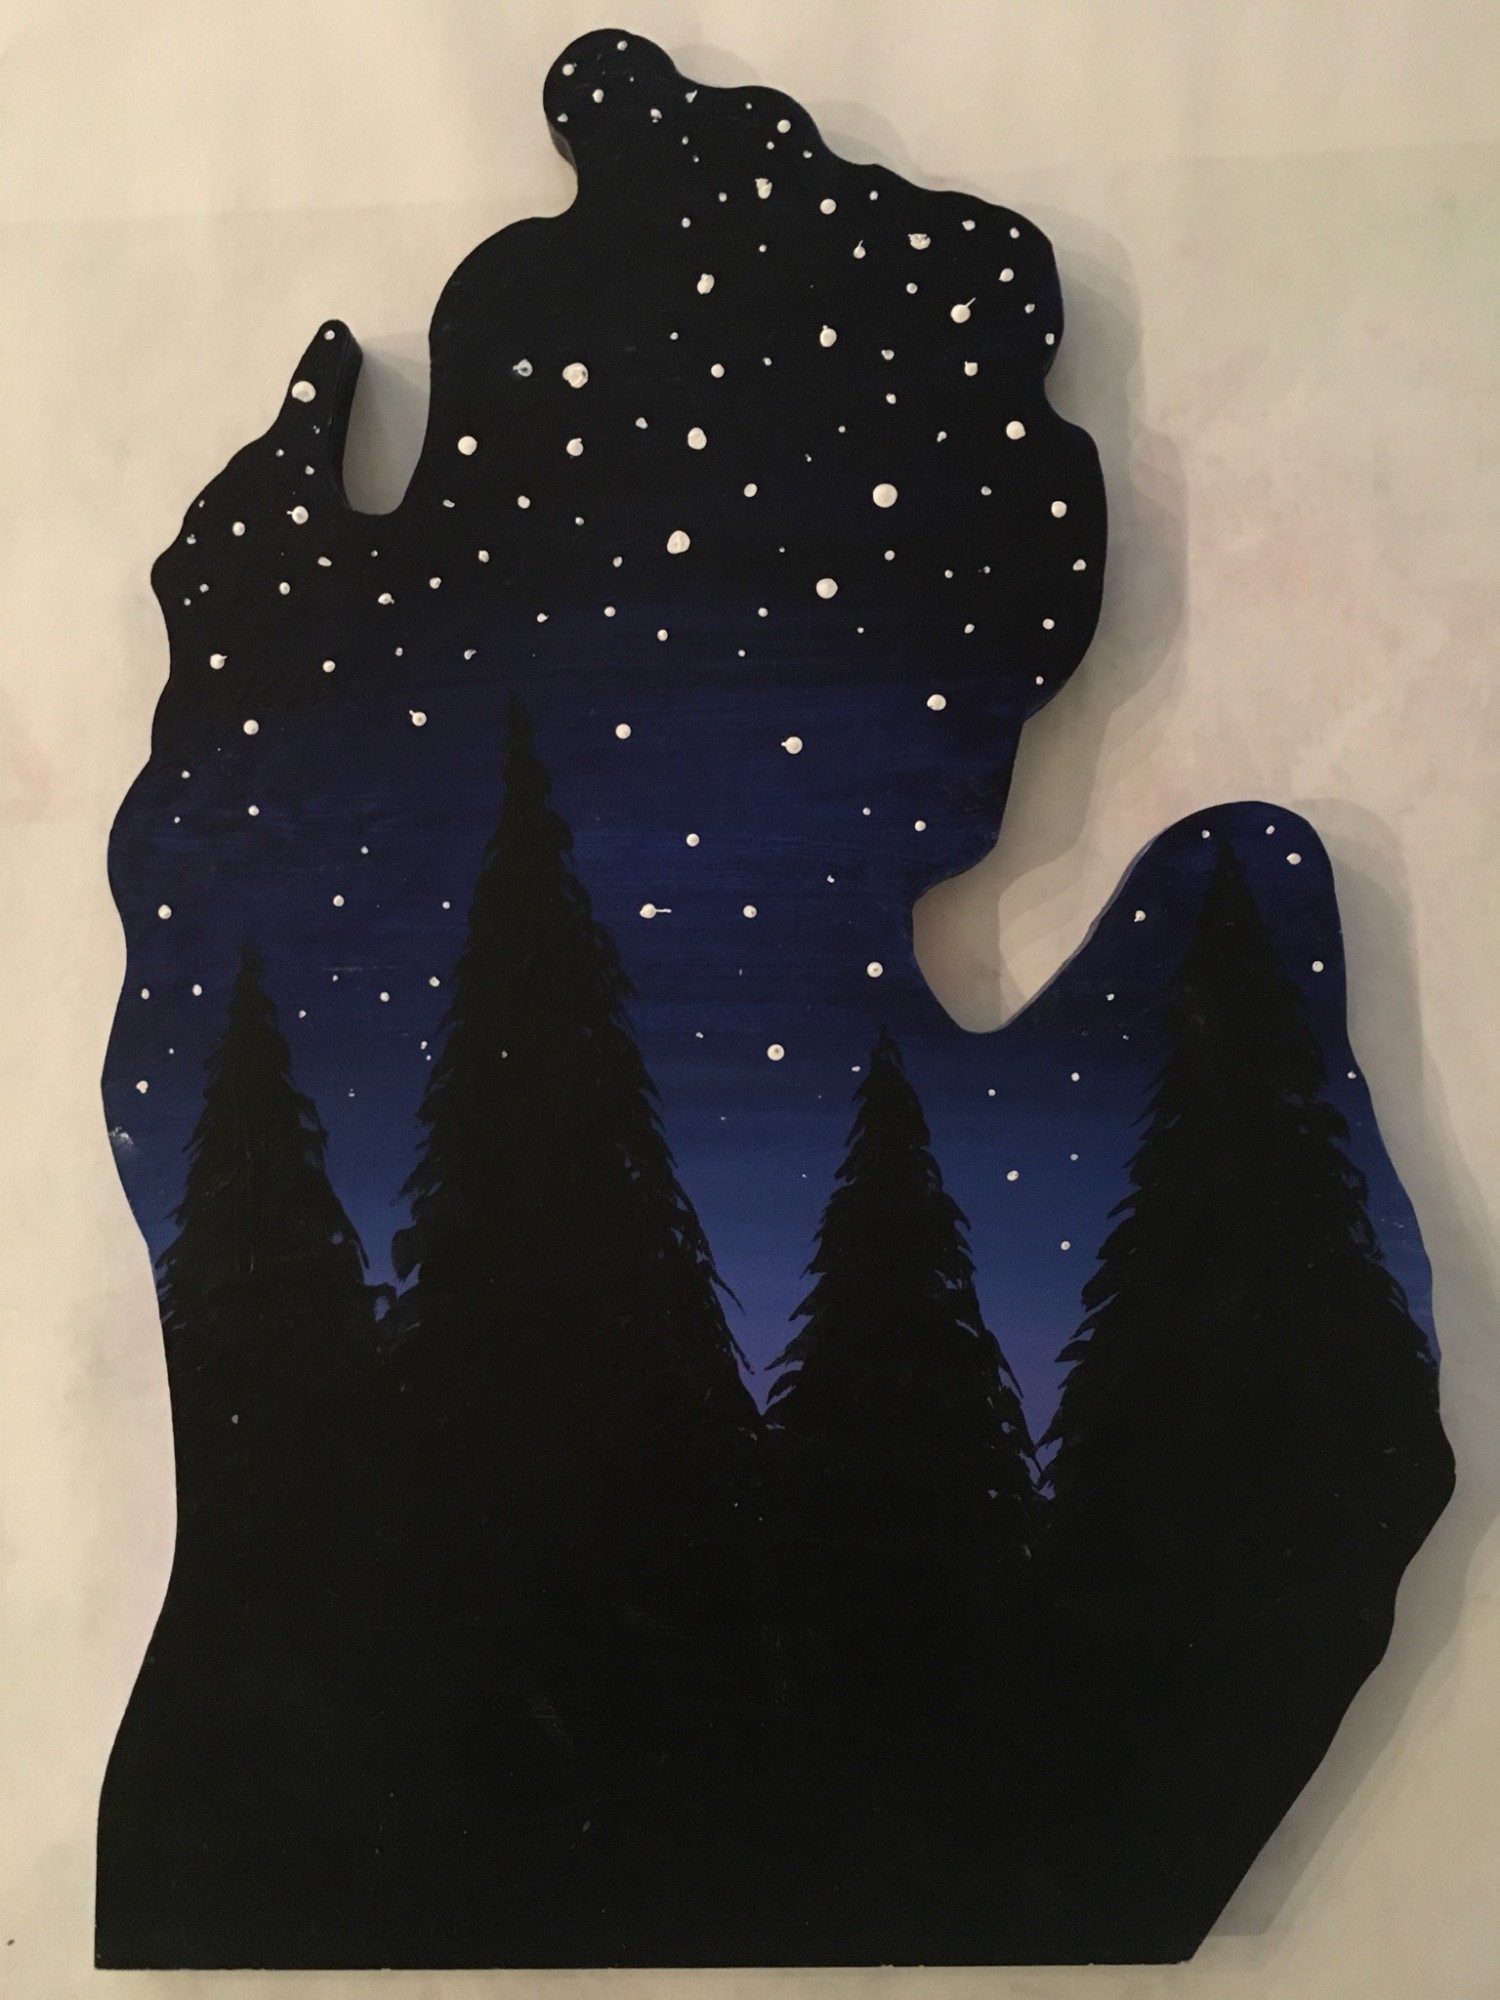 Night Sky on a Wooden MI Cut Out - Downtown GR